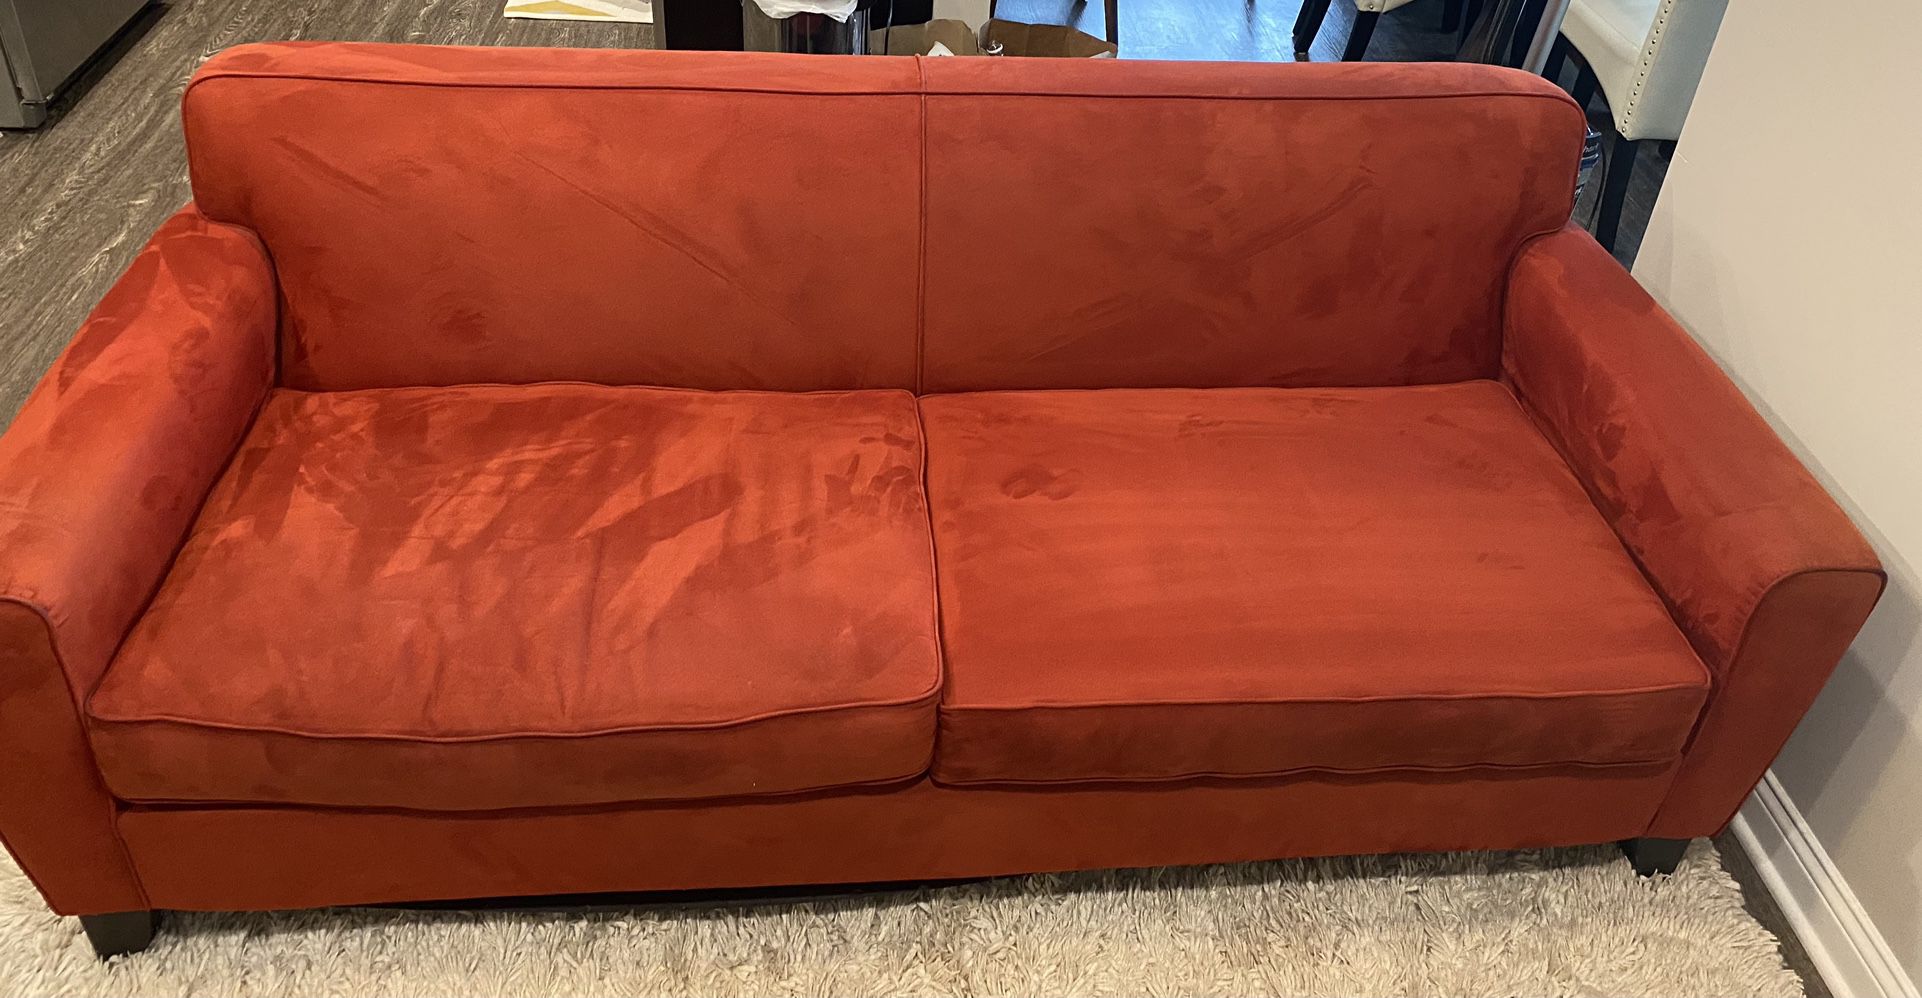 Red/orange Couch From Macy’s